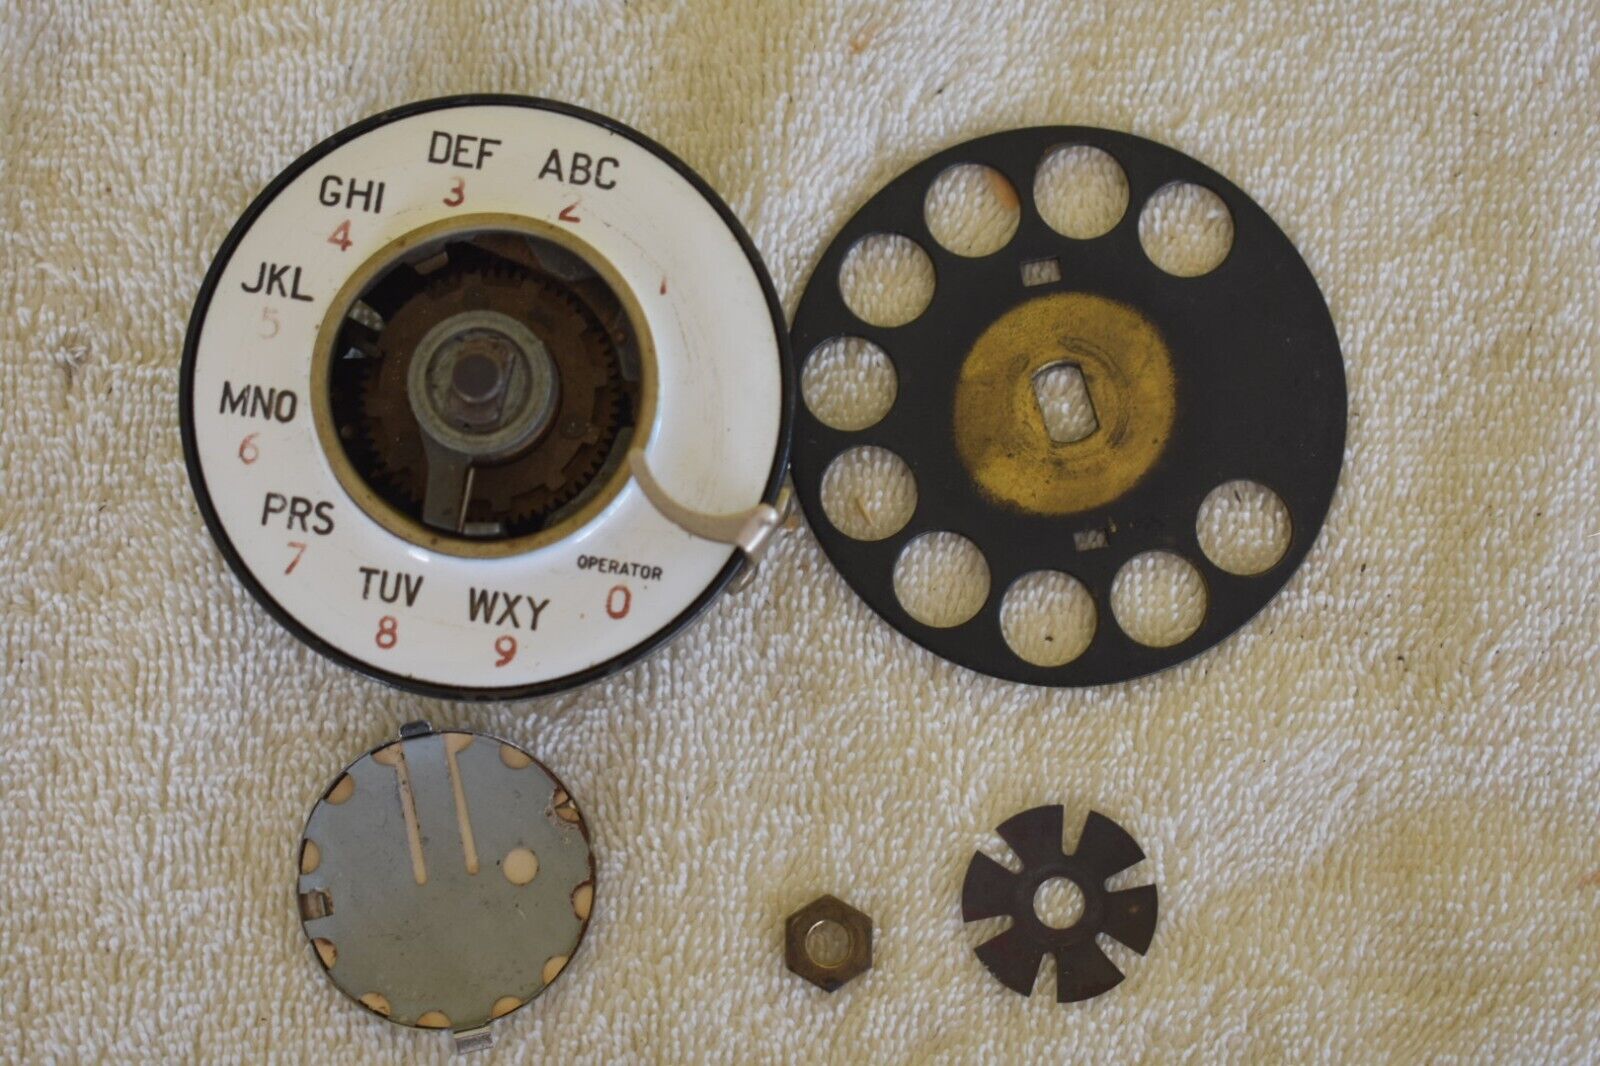 Early Western Electric Telephone #2AB dial